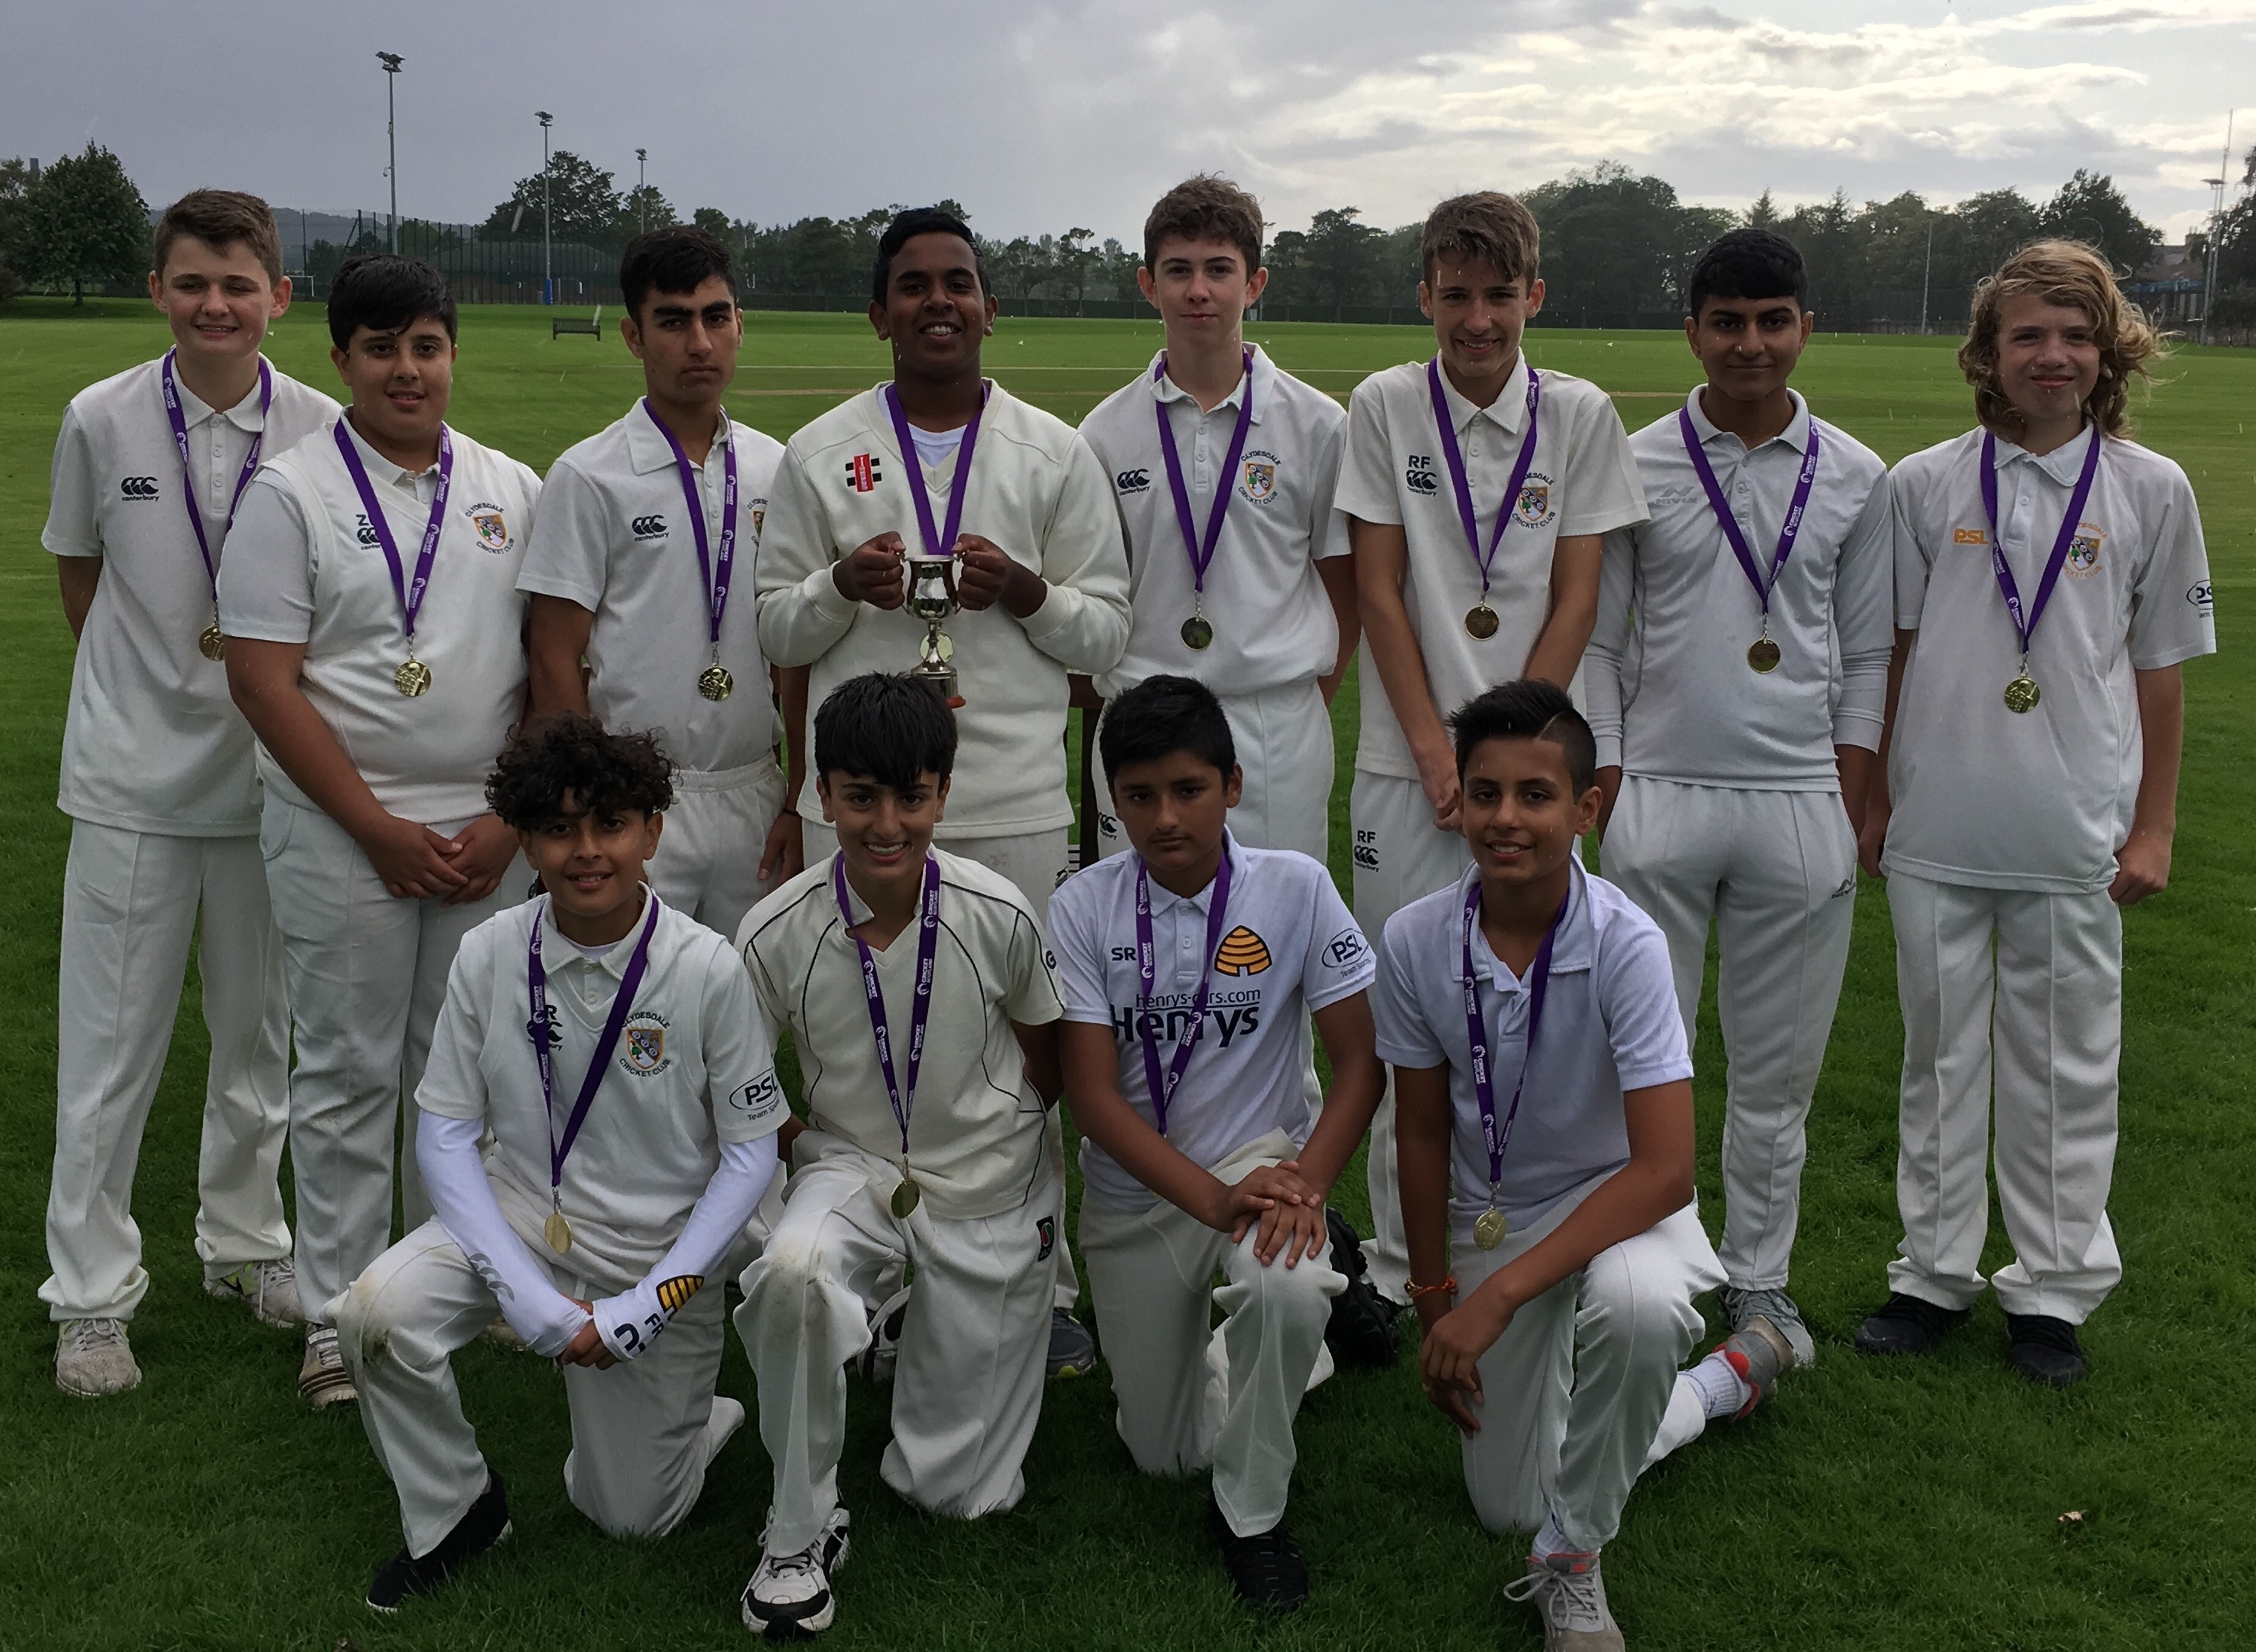 Clydesdale crowned U14 Scottish Cup champions